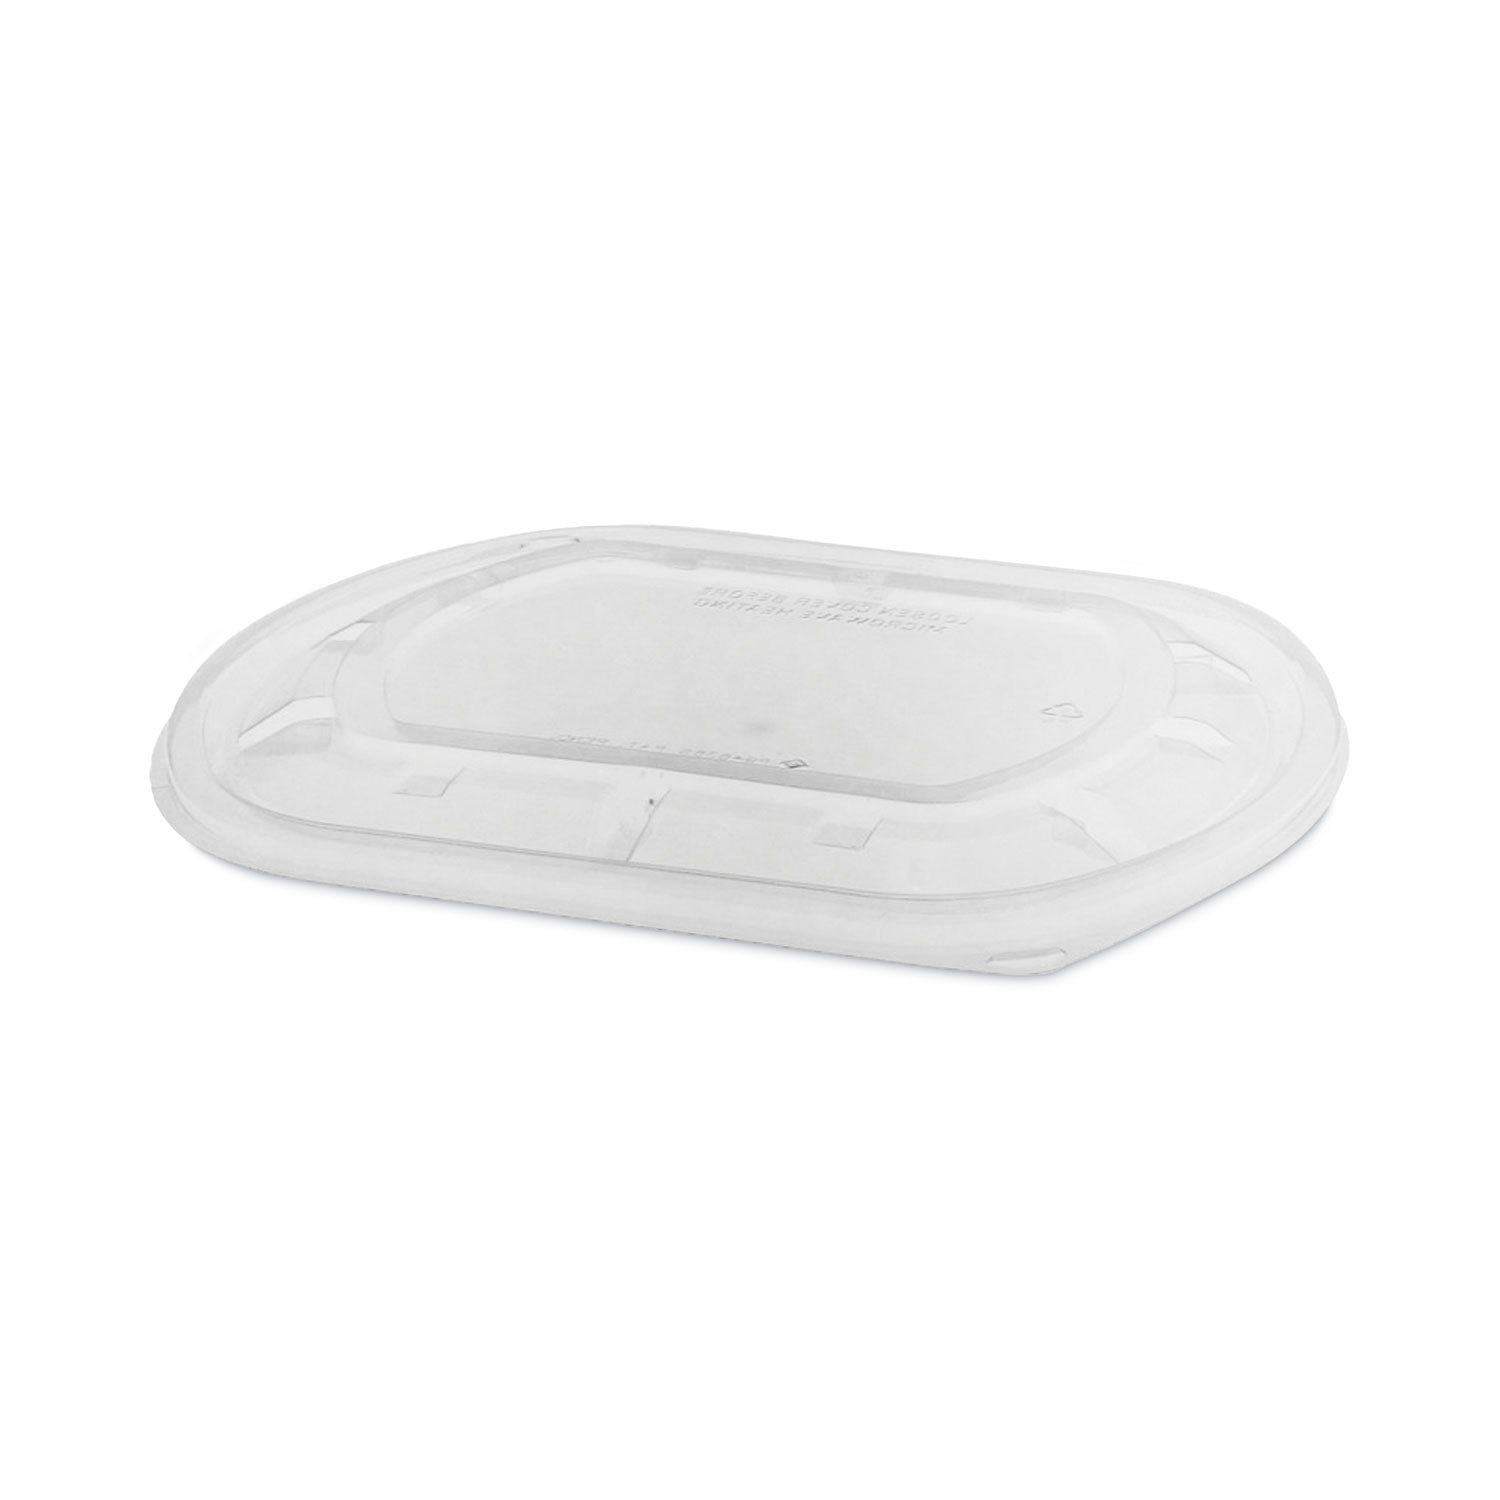 clearview-mealmaster-lid-with-fog-gard-coating-large-flat-lid-938-x-8-x-038-clear-plastic-300-carton_pctycn8463s00d0 - 2